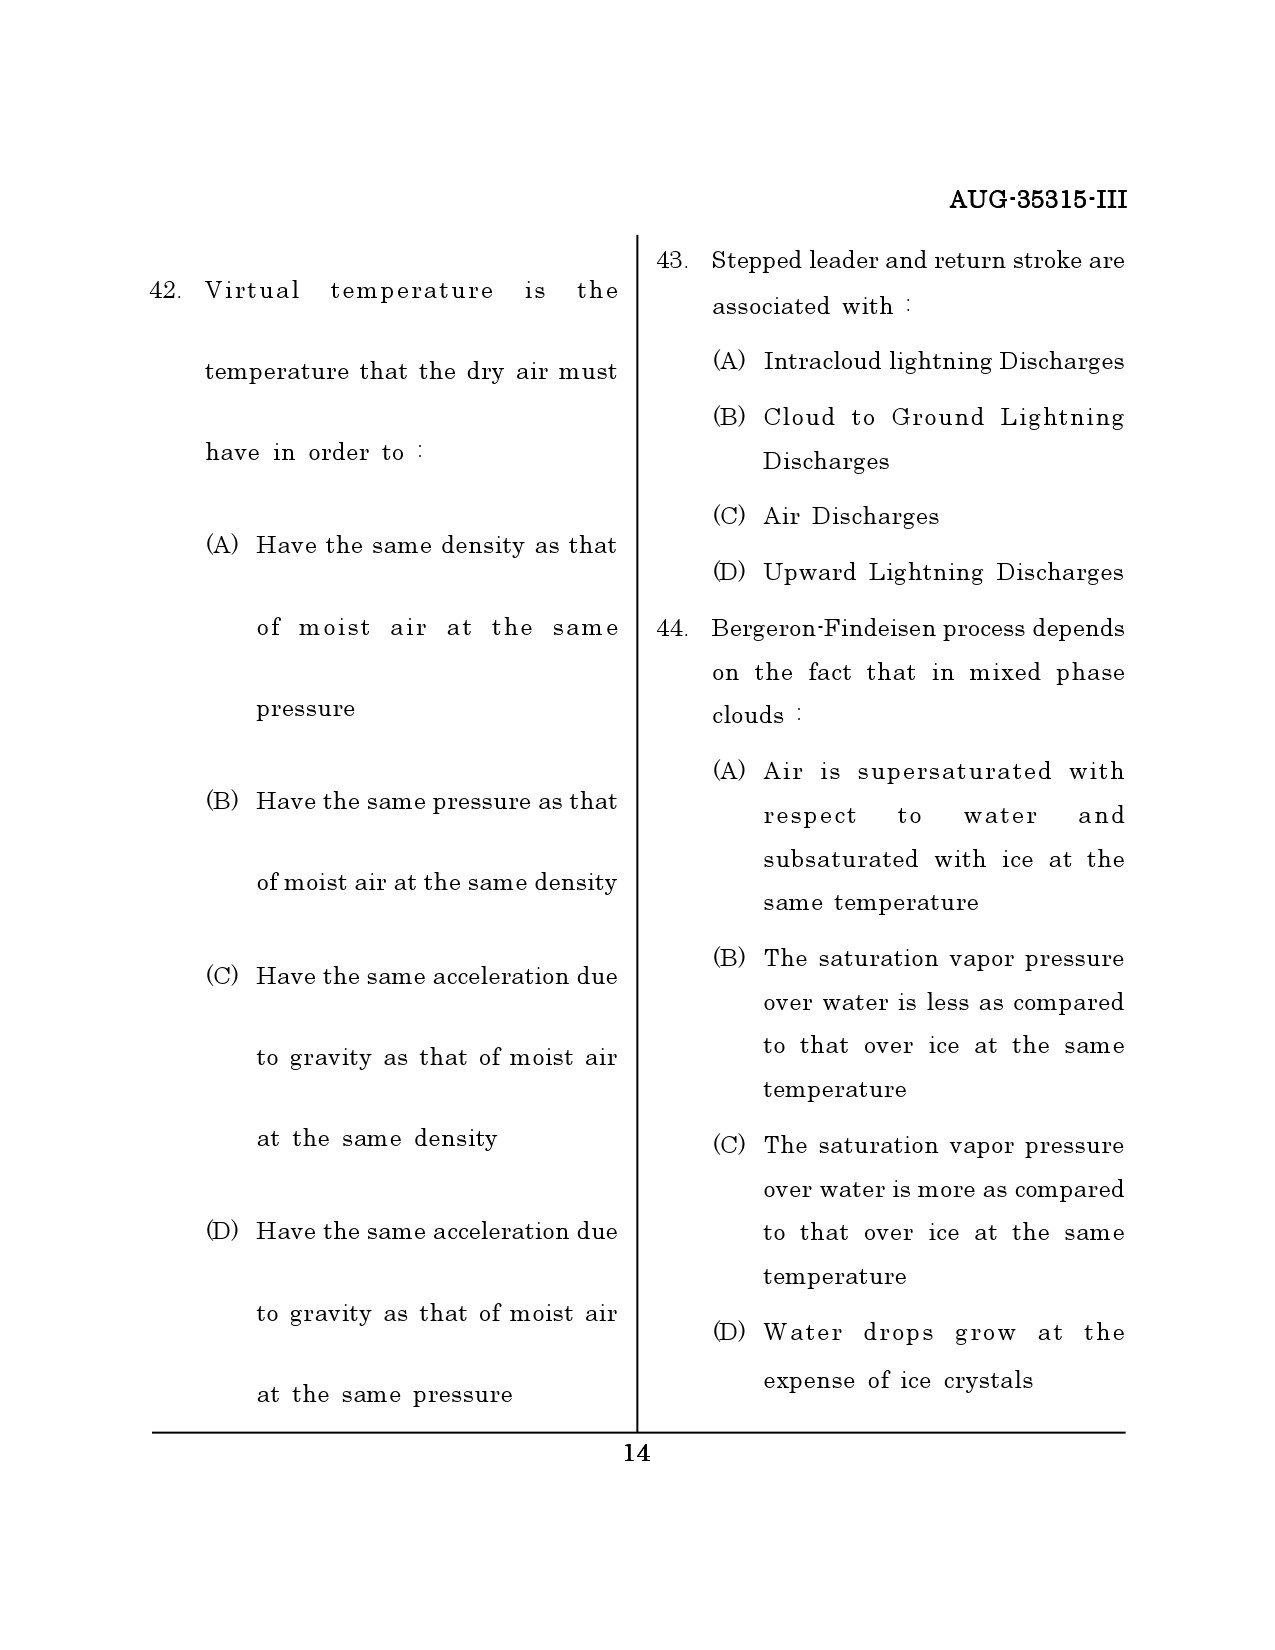 Maharashtra SET Earth Atmospheric Ocean Planetary Science Question Paper III August 2015 13